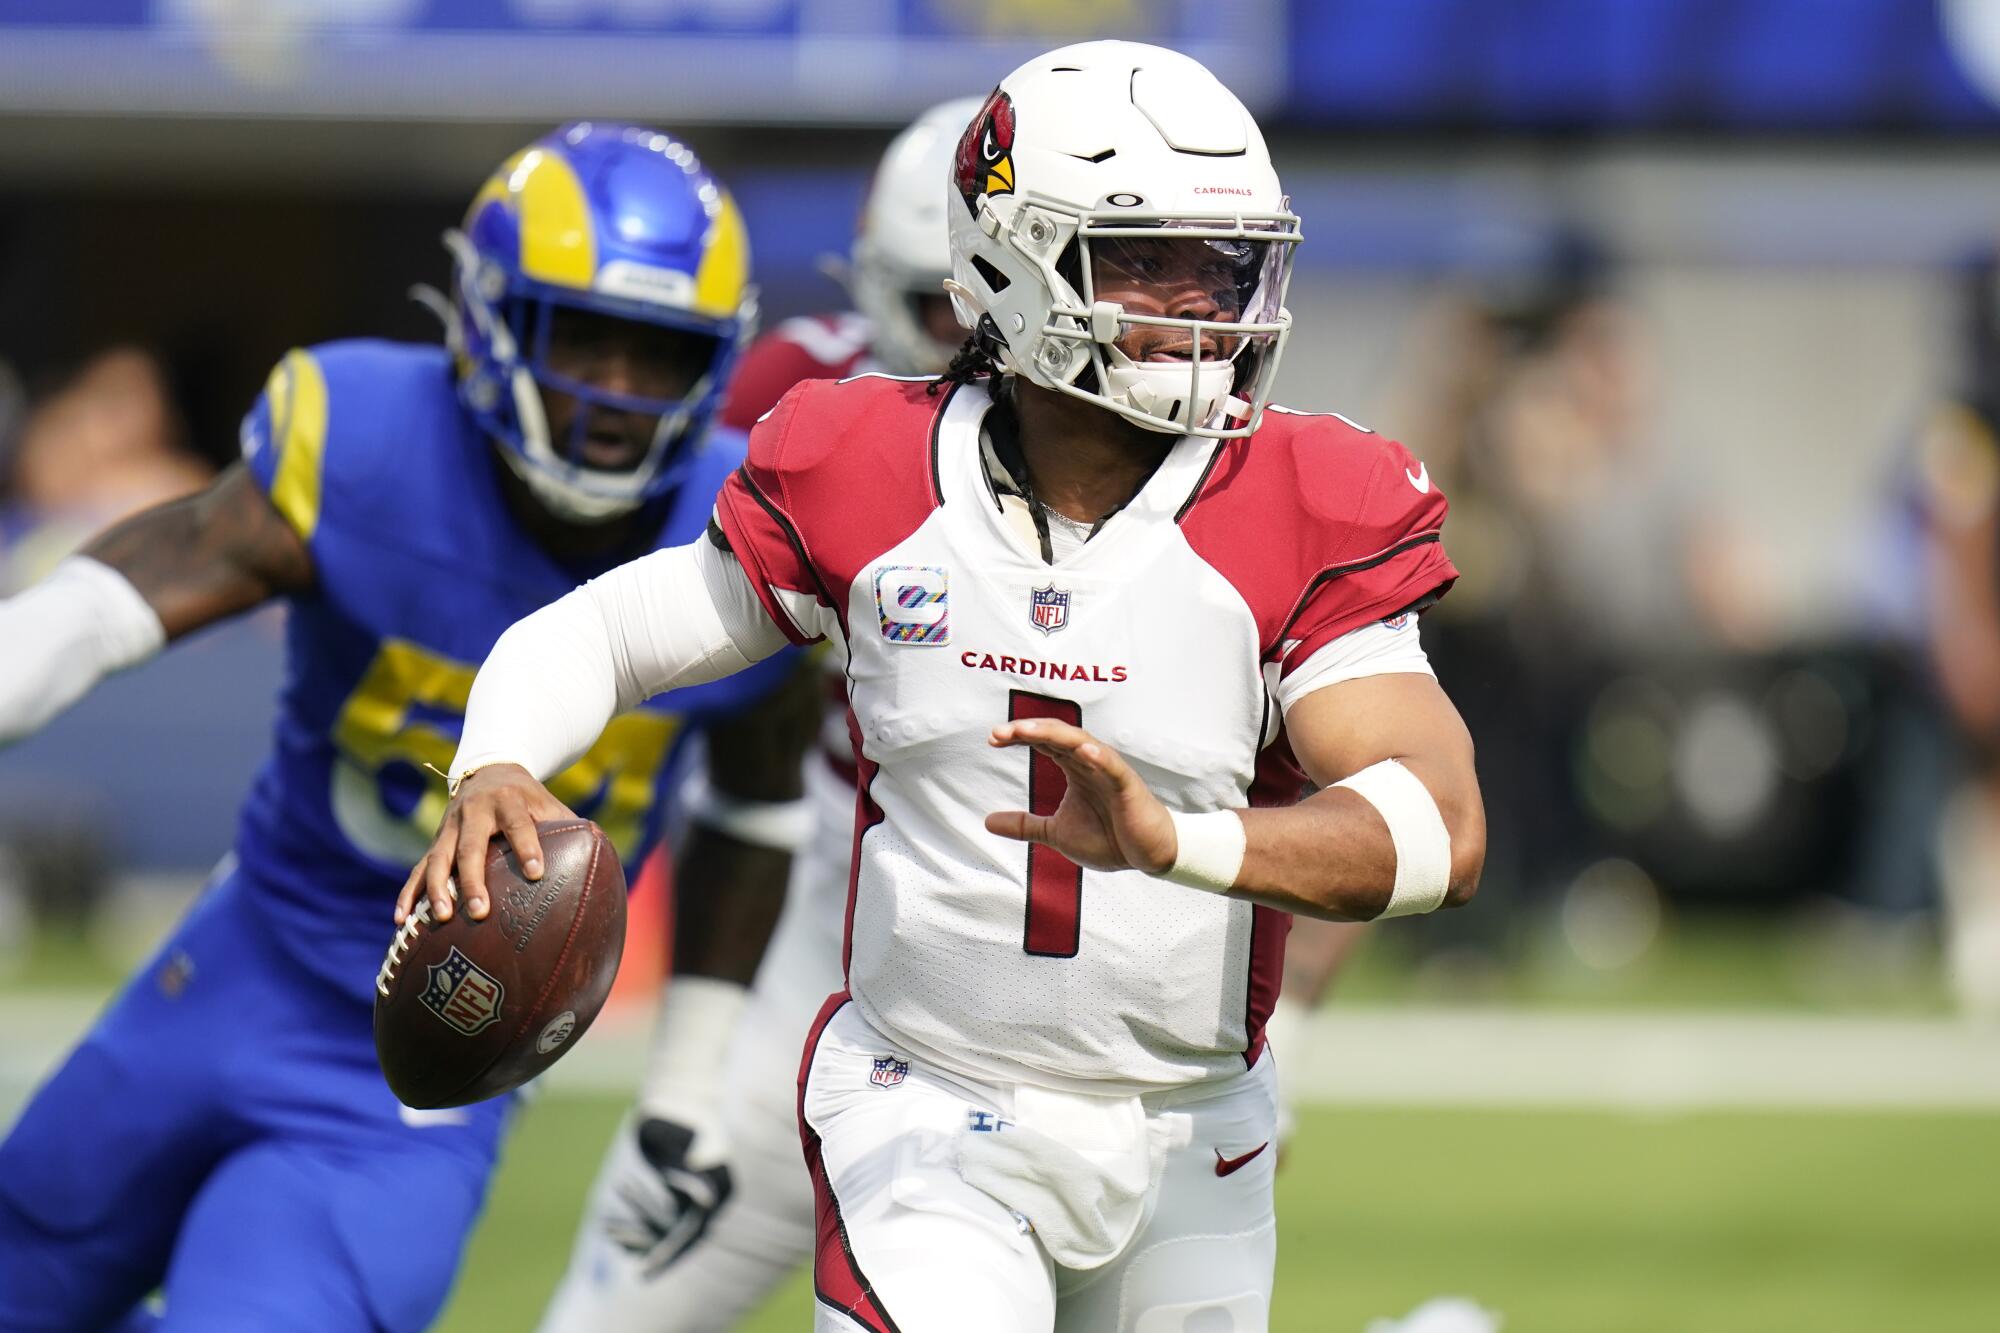 Look out, Bucs. Arizona's Kyler Murray is playing fast and mistake